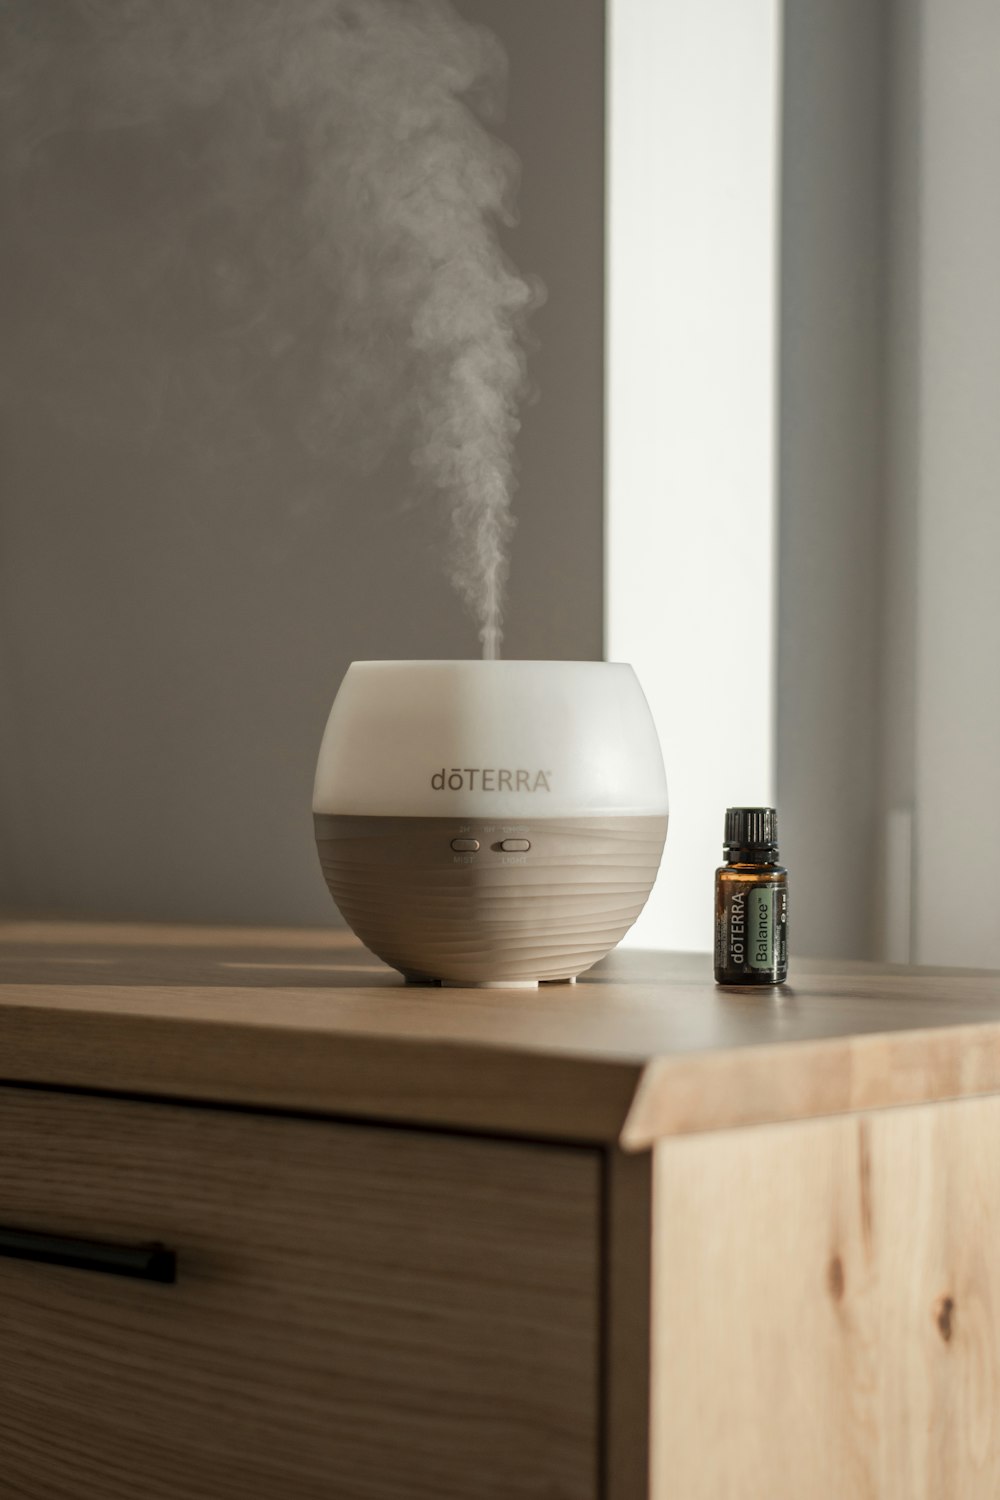 a humidifier sitting on top of a wooden dresser